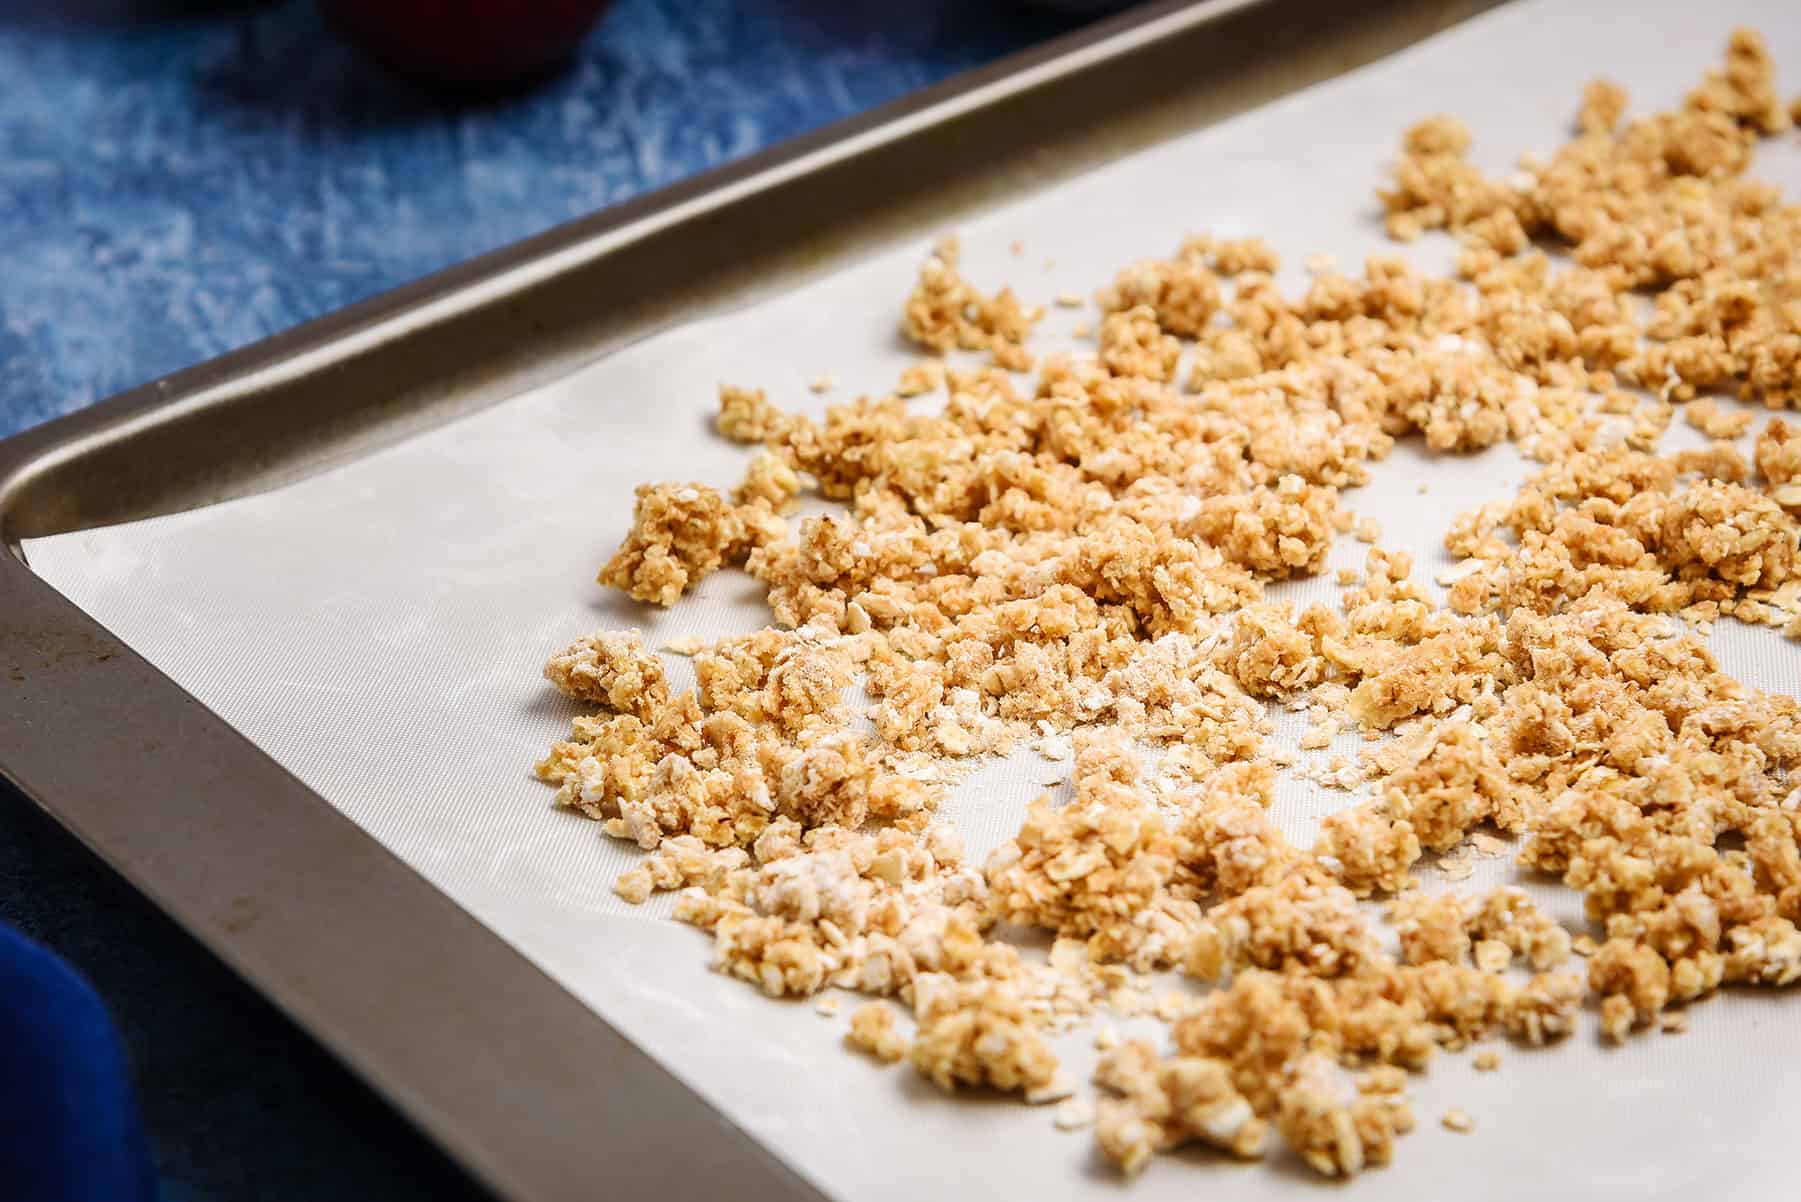 Crumble mixture on an oven tray for baking